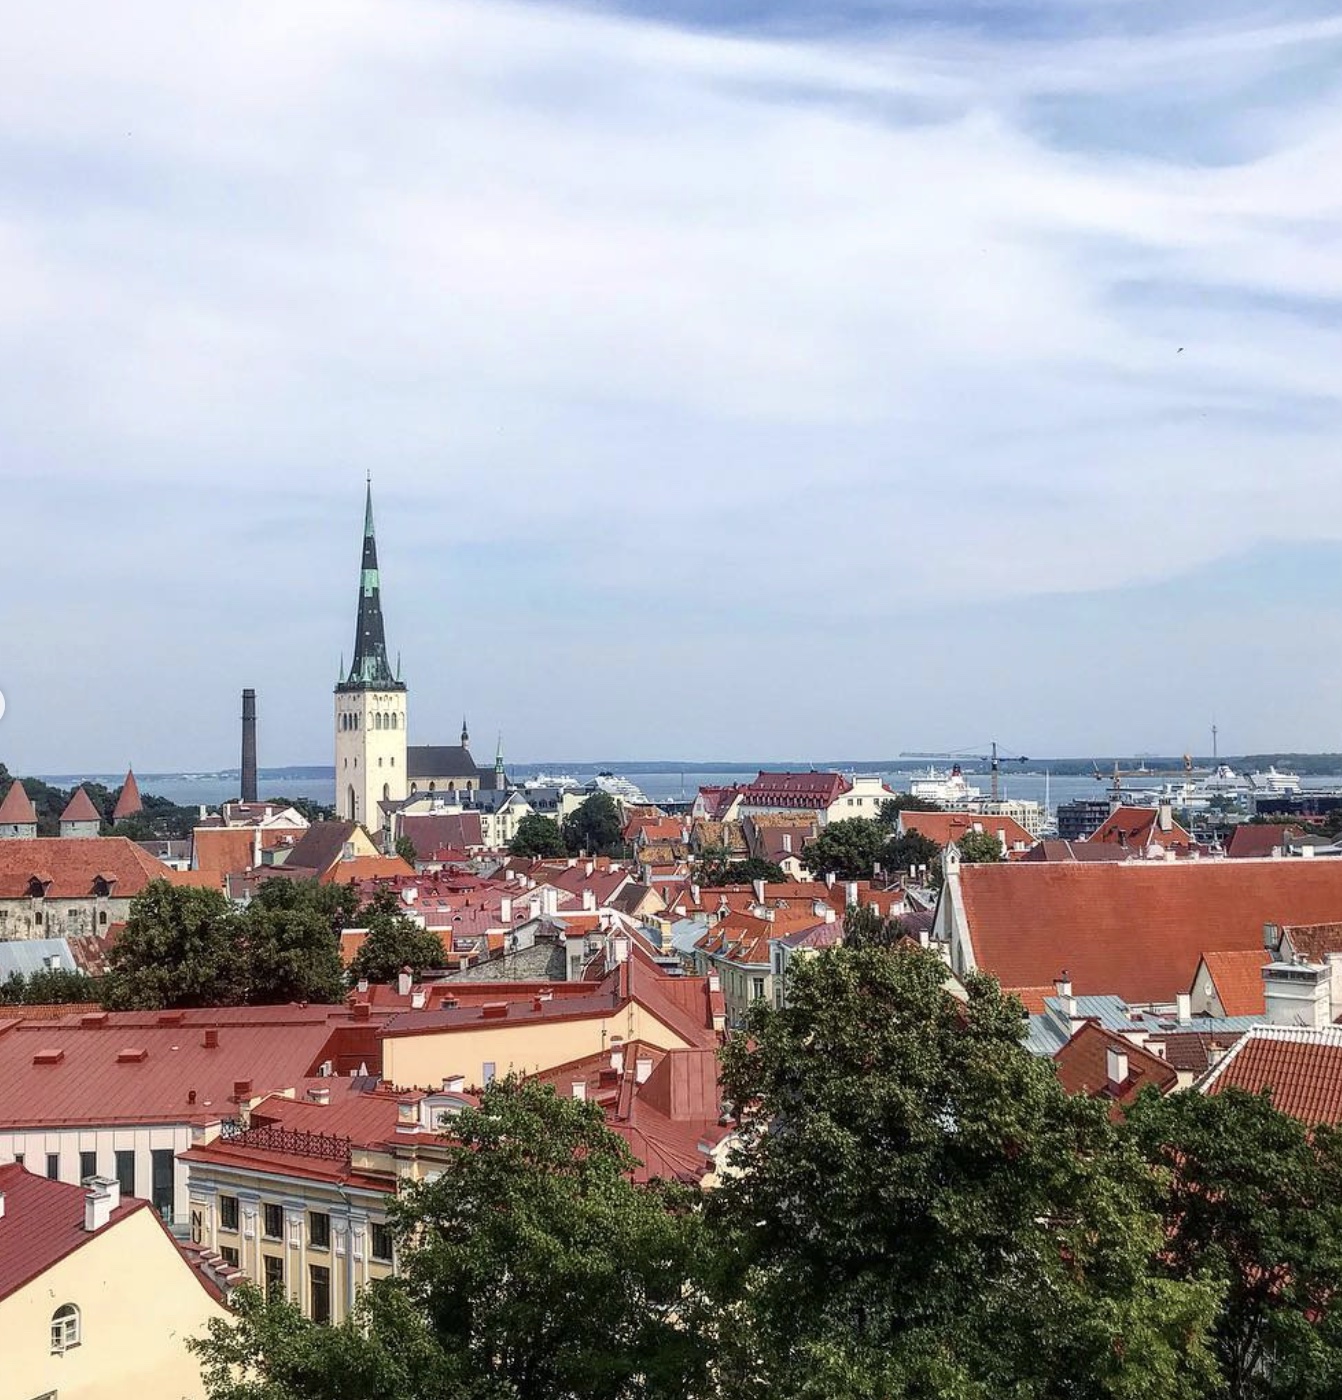 The skyline of Tallinn, Estonia. There is a tall church spire and many buildings with red roofs, dotted with trees. In the background, there is a body of water.